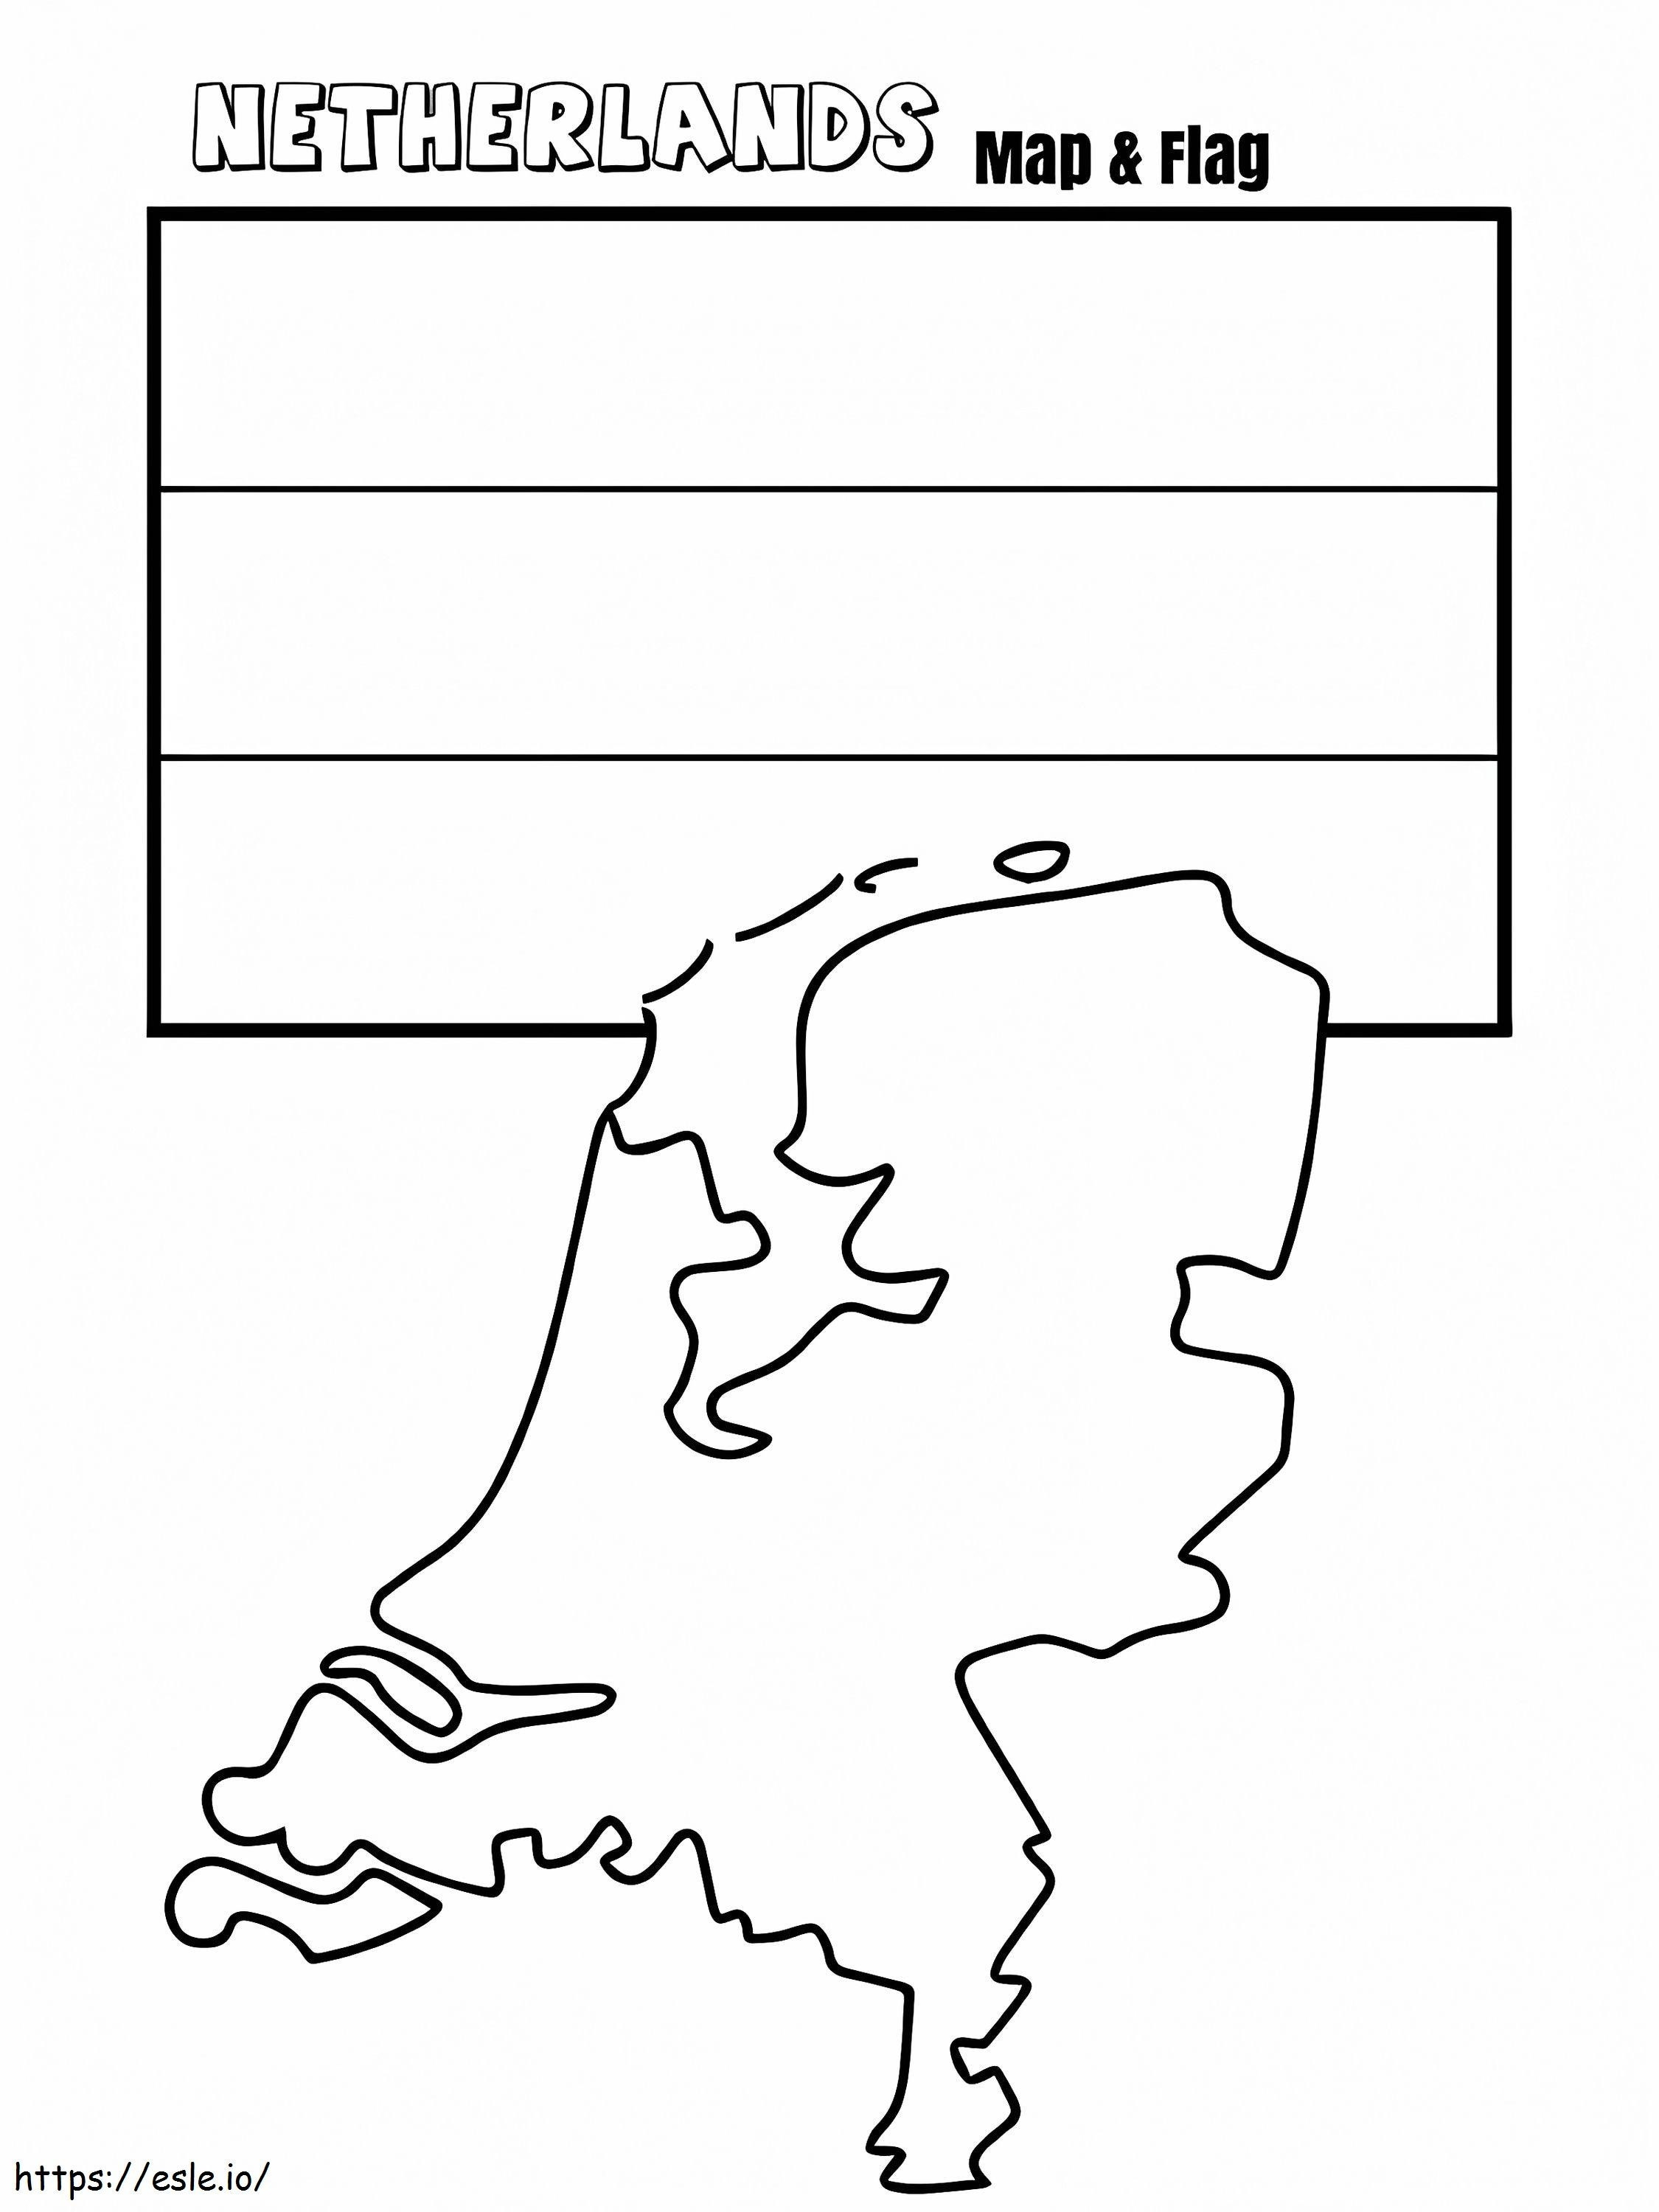 Netherlands Map And Flag coloring page